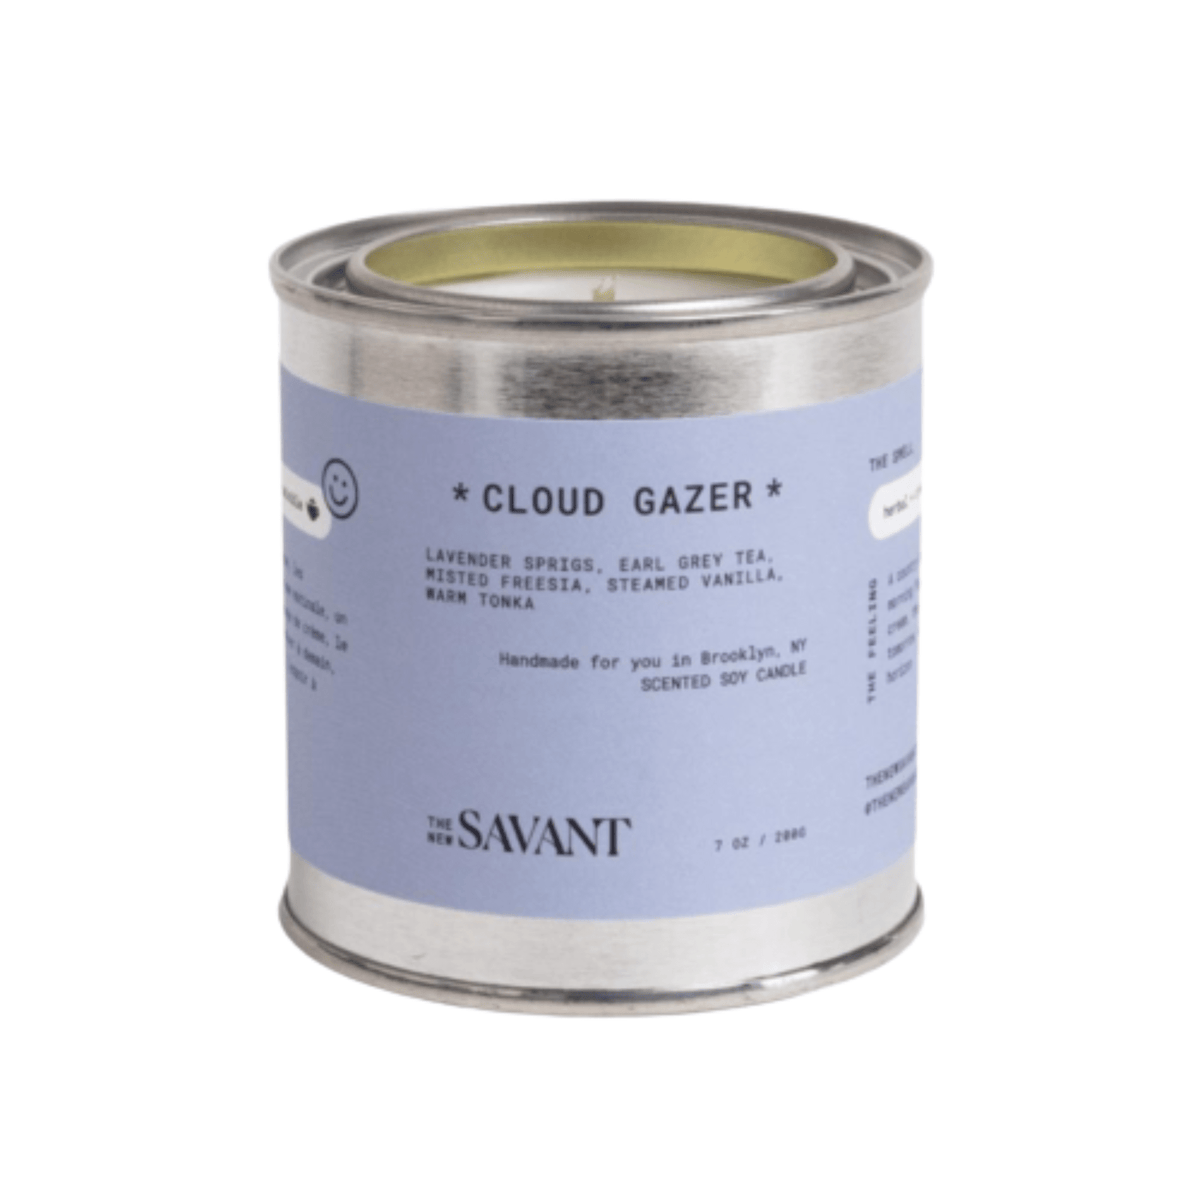 Primary Image of Cloud Gazer Candle